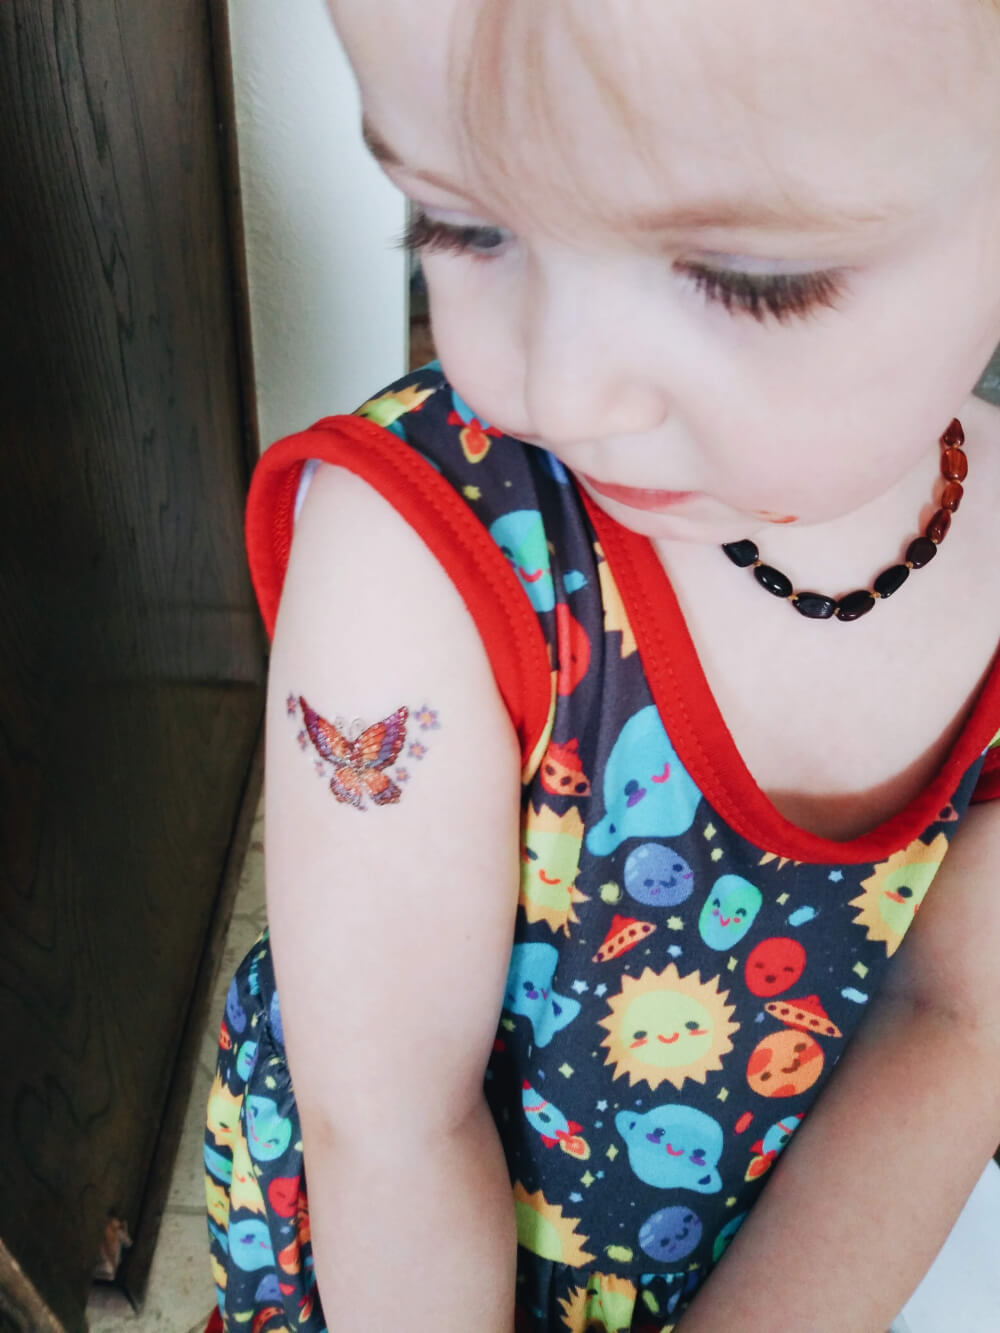 White toddler in solar system dress, looking at a temporary butterfly tattoo on her shoulder